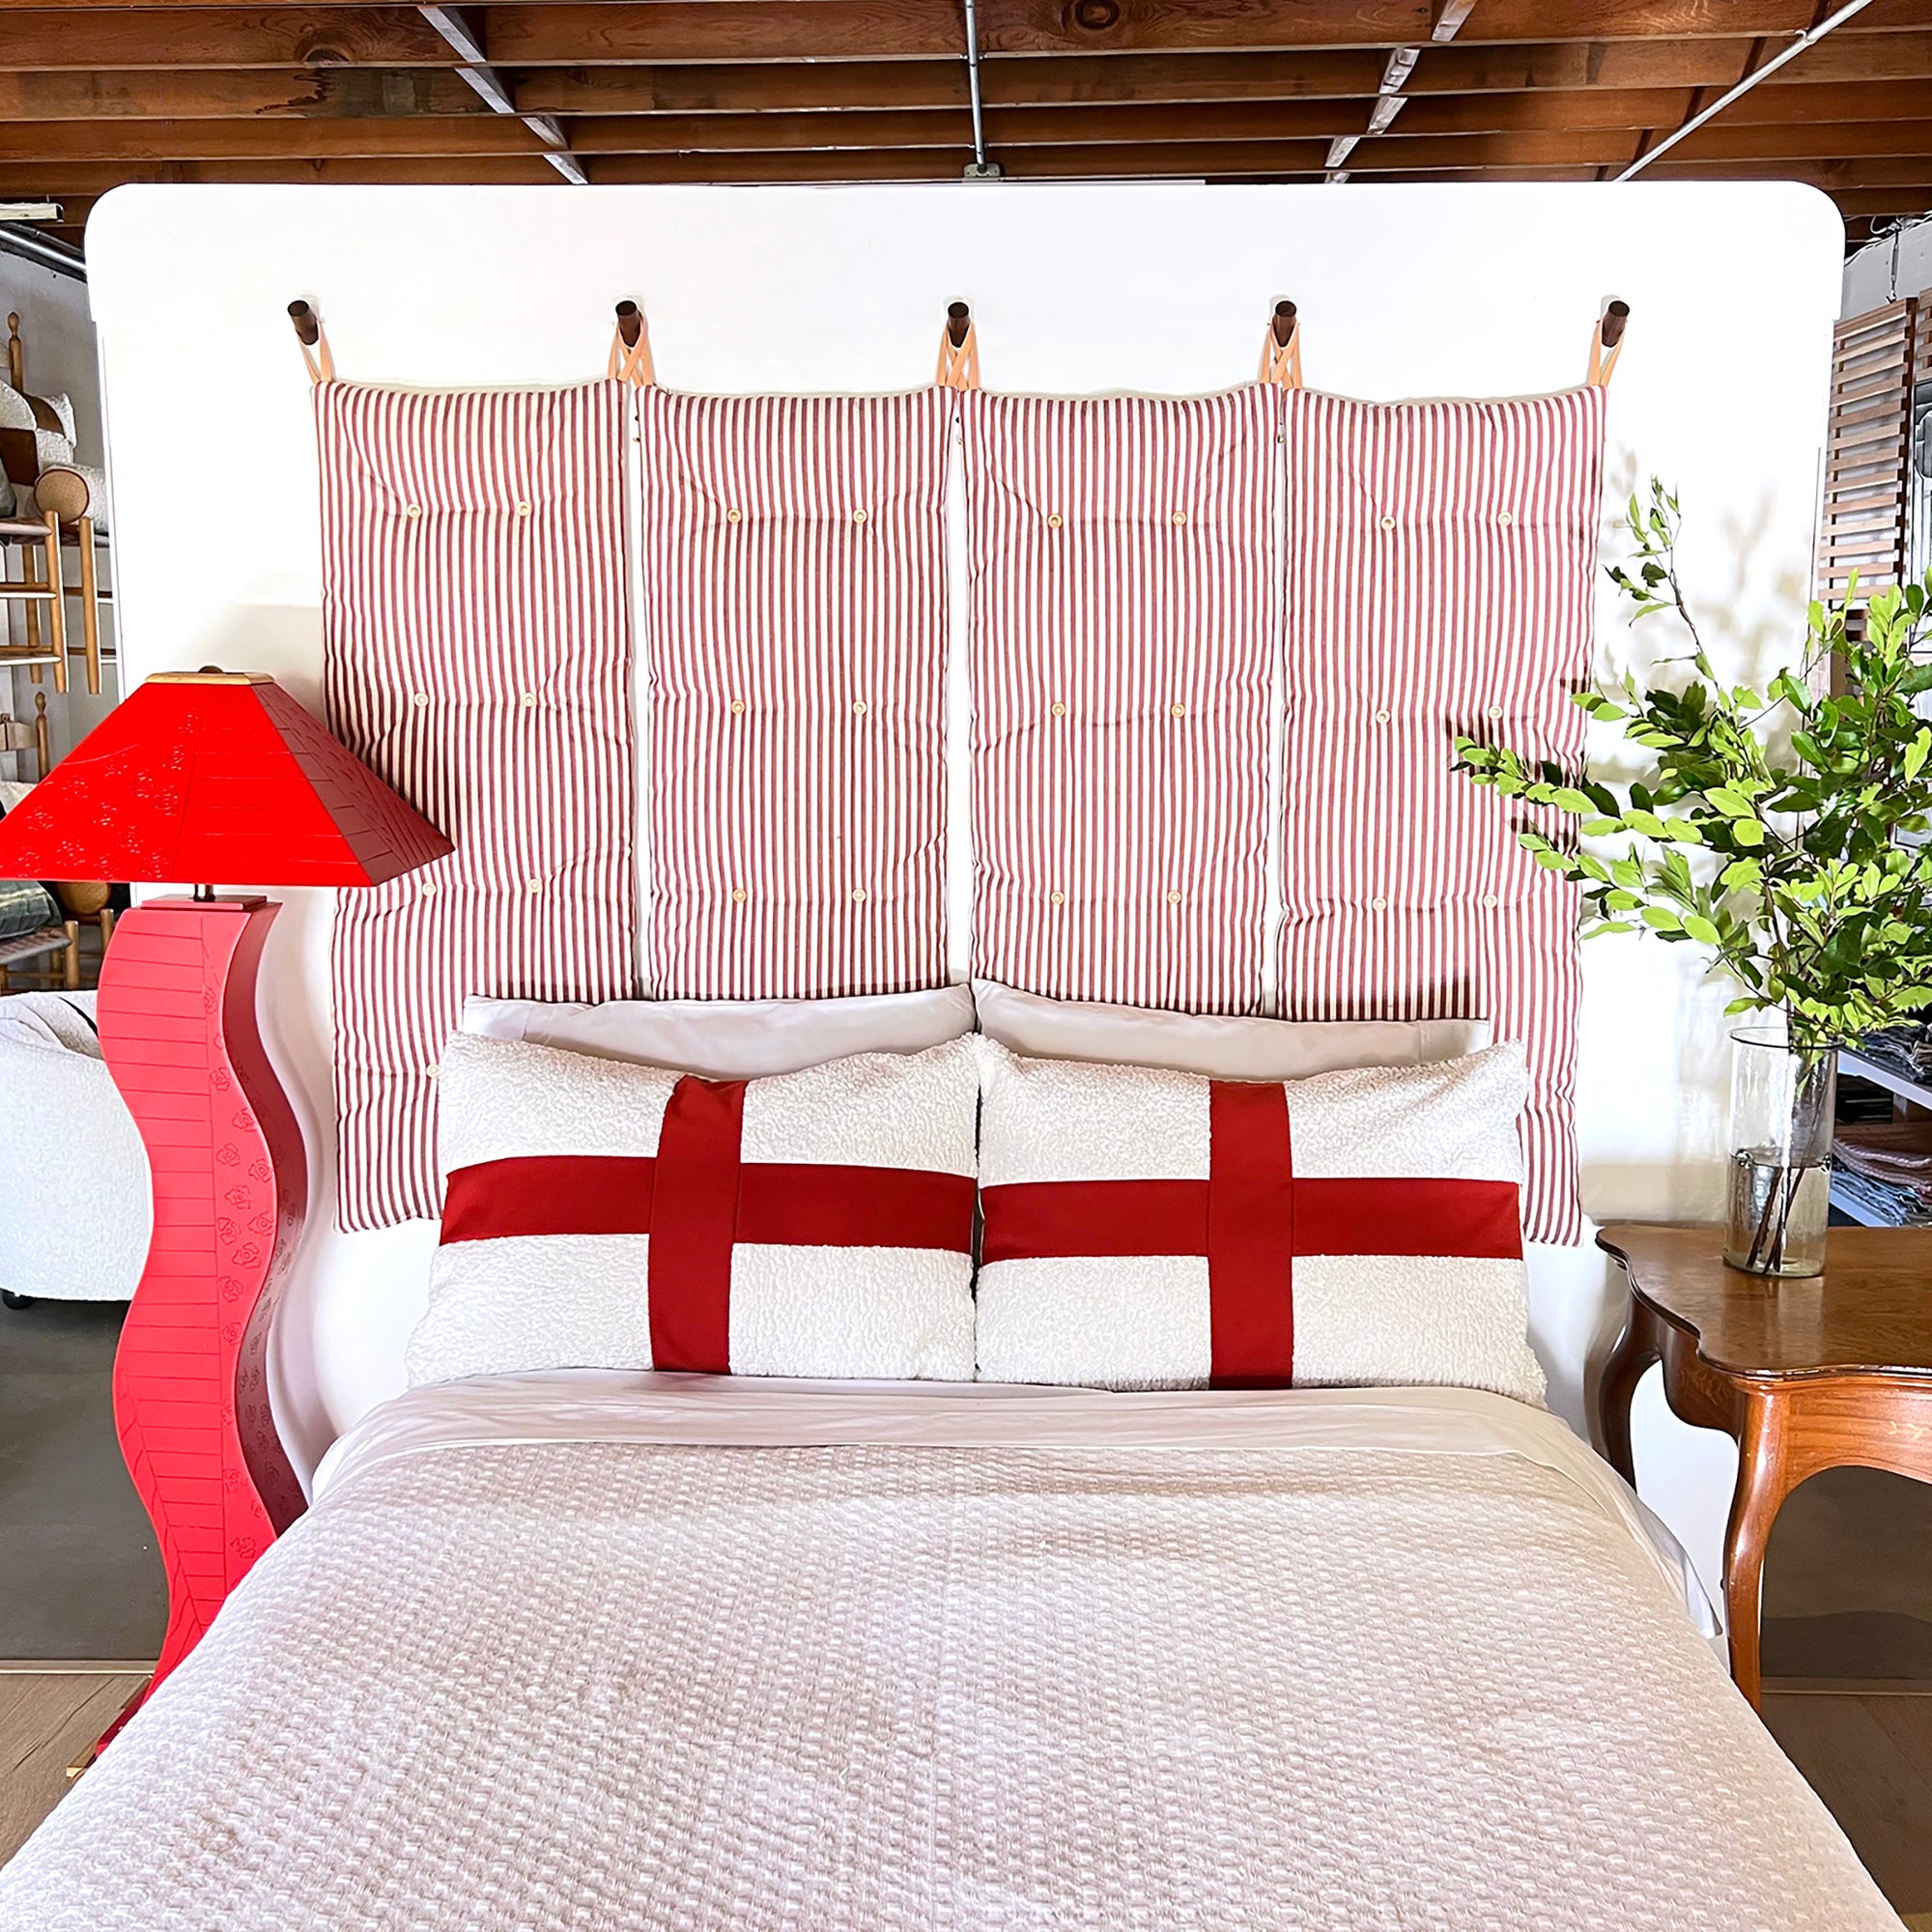 Four red and off-white stripe tuft wall cushions hanging above a queen bed. Red abstract curvy floor lamp to the left and side table with greenery to the right of the bed. 